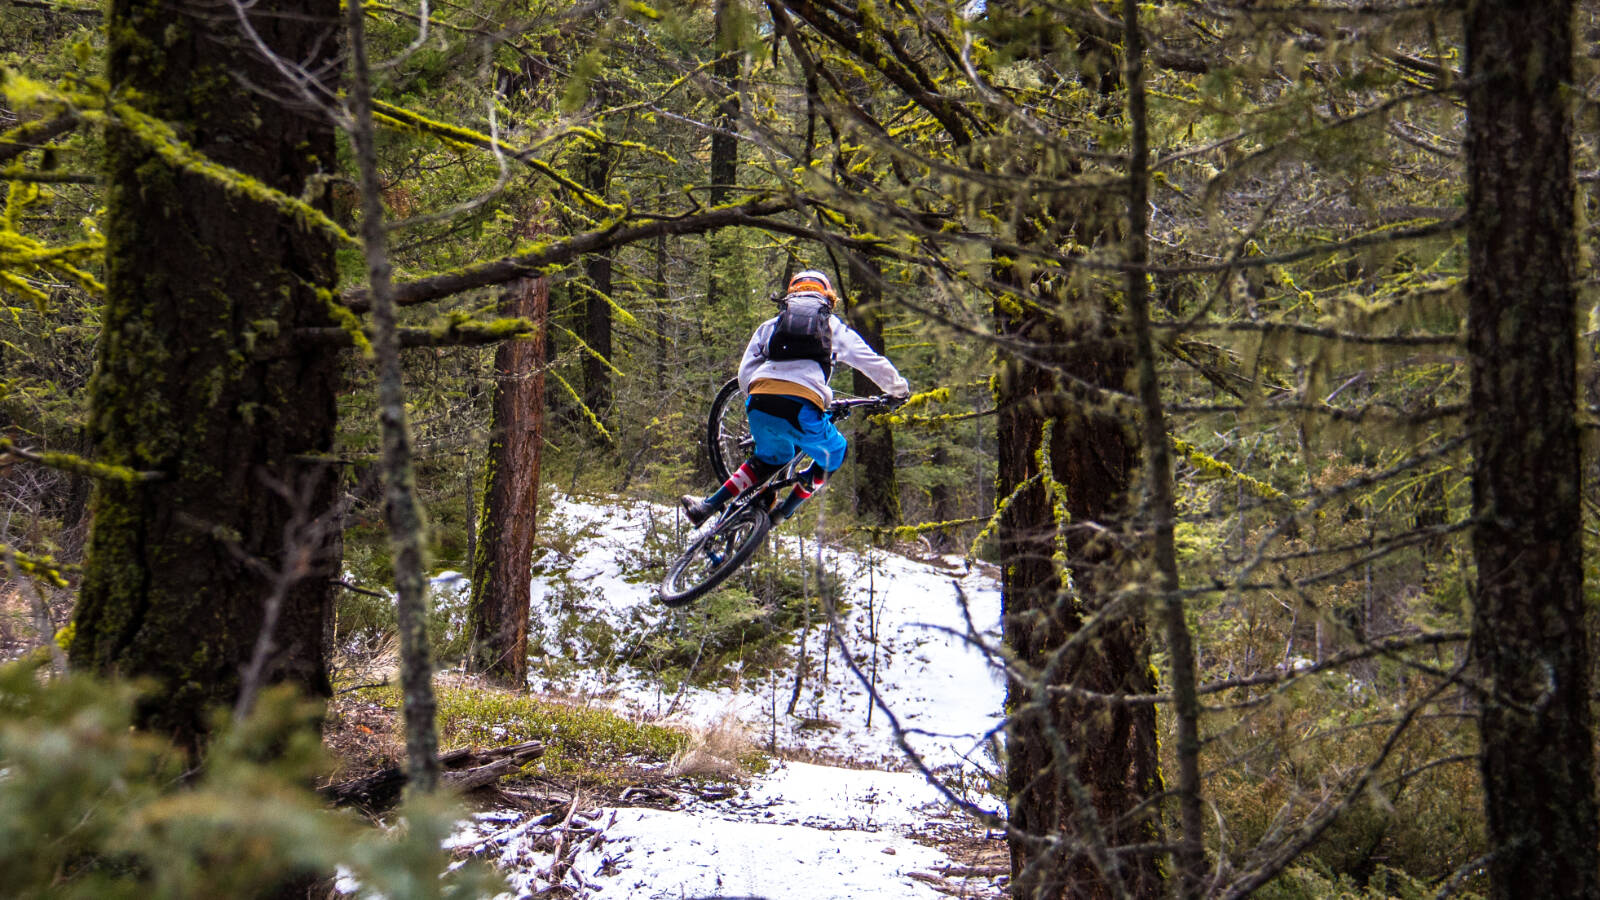 Not just for summer! A winter-suitable mountain bike offers a great way to get out and enjoy views that are uniquely Cariboo. Photo courtesy Explore Cariboo